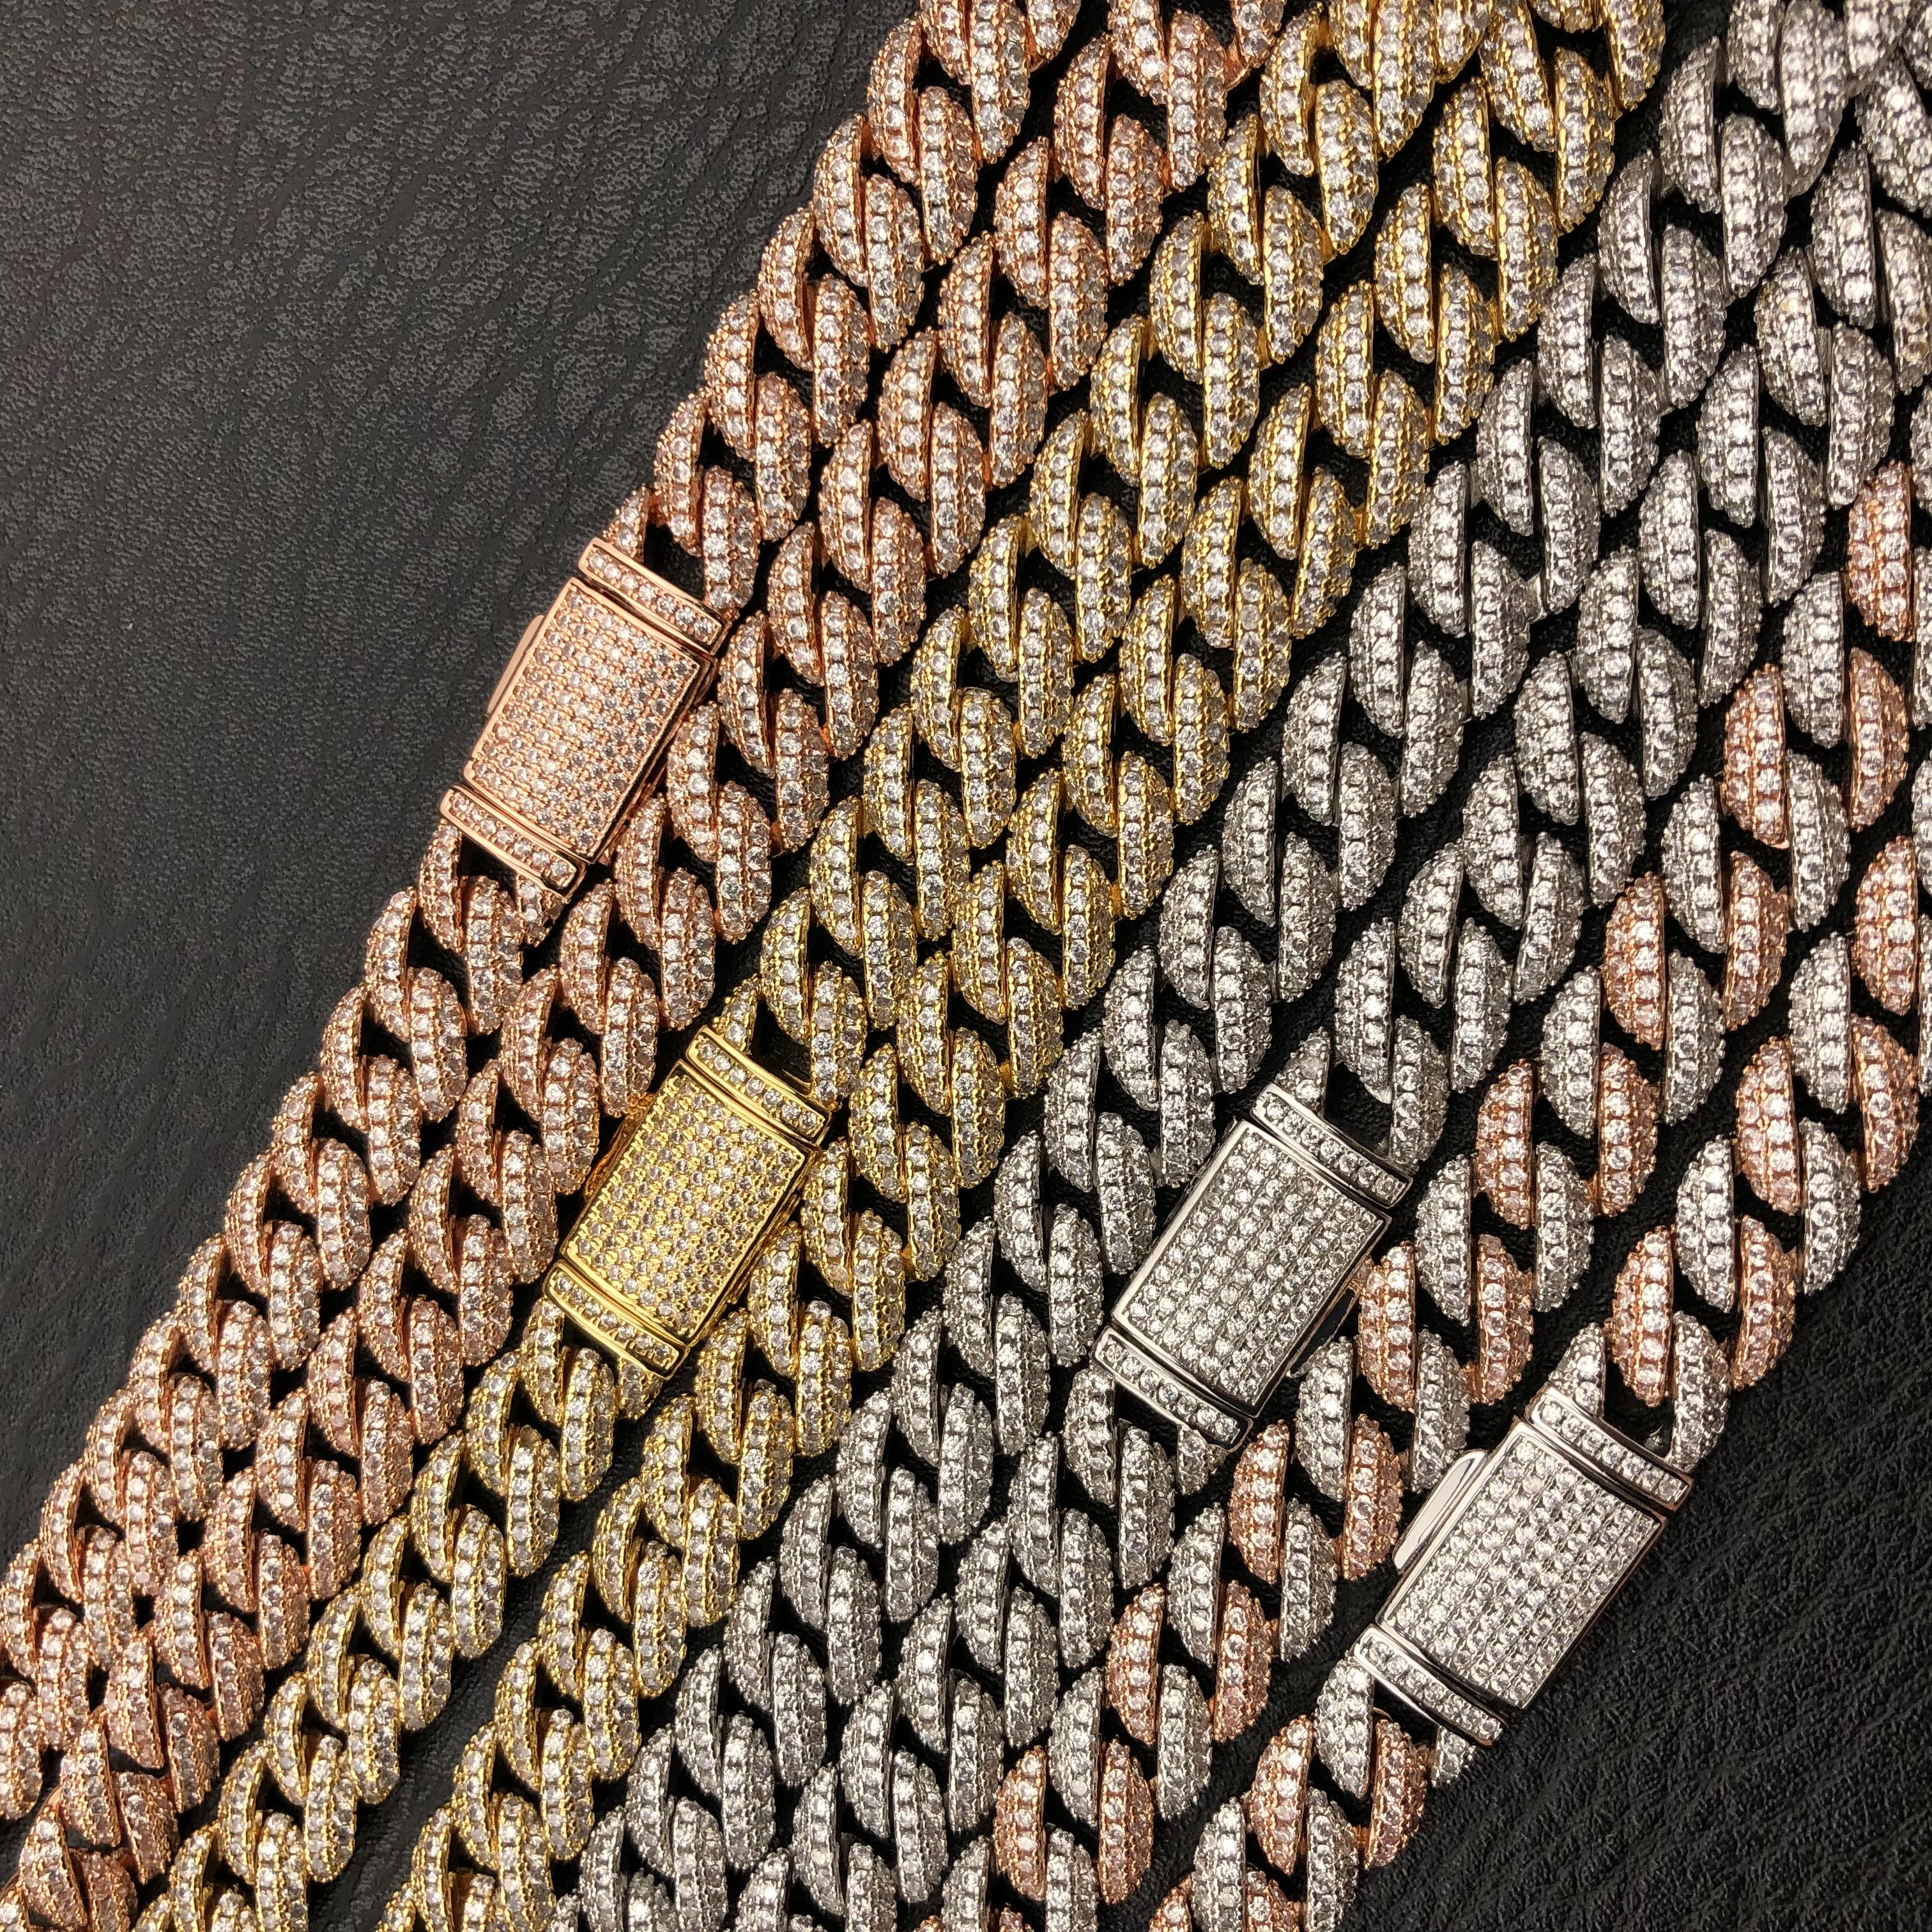 10mm cuban Link Chain in yellow gold and white gold